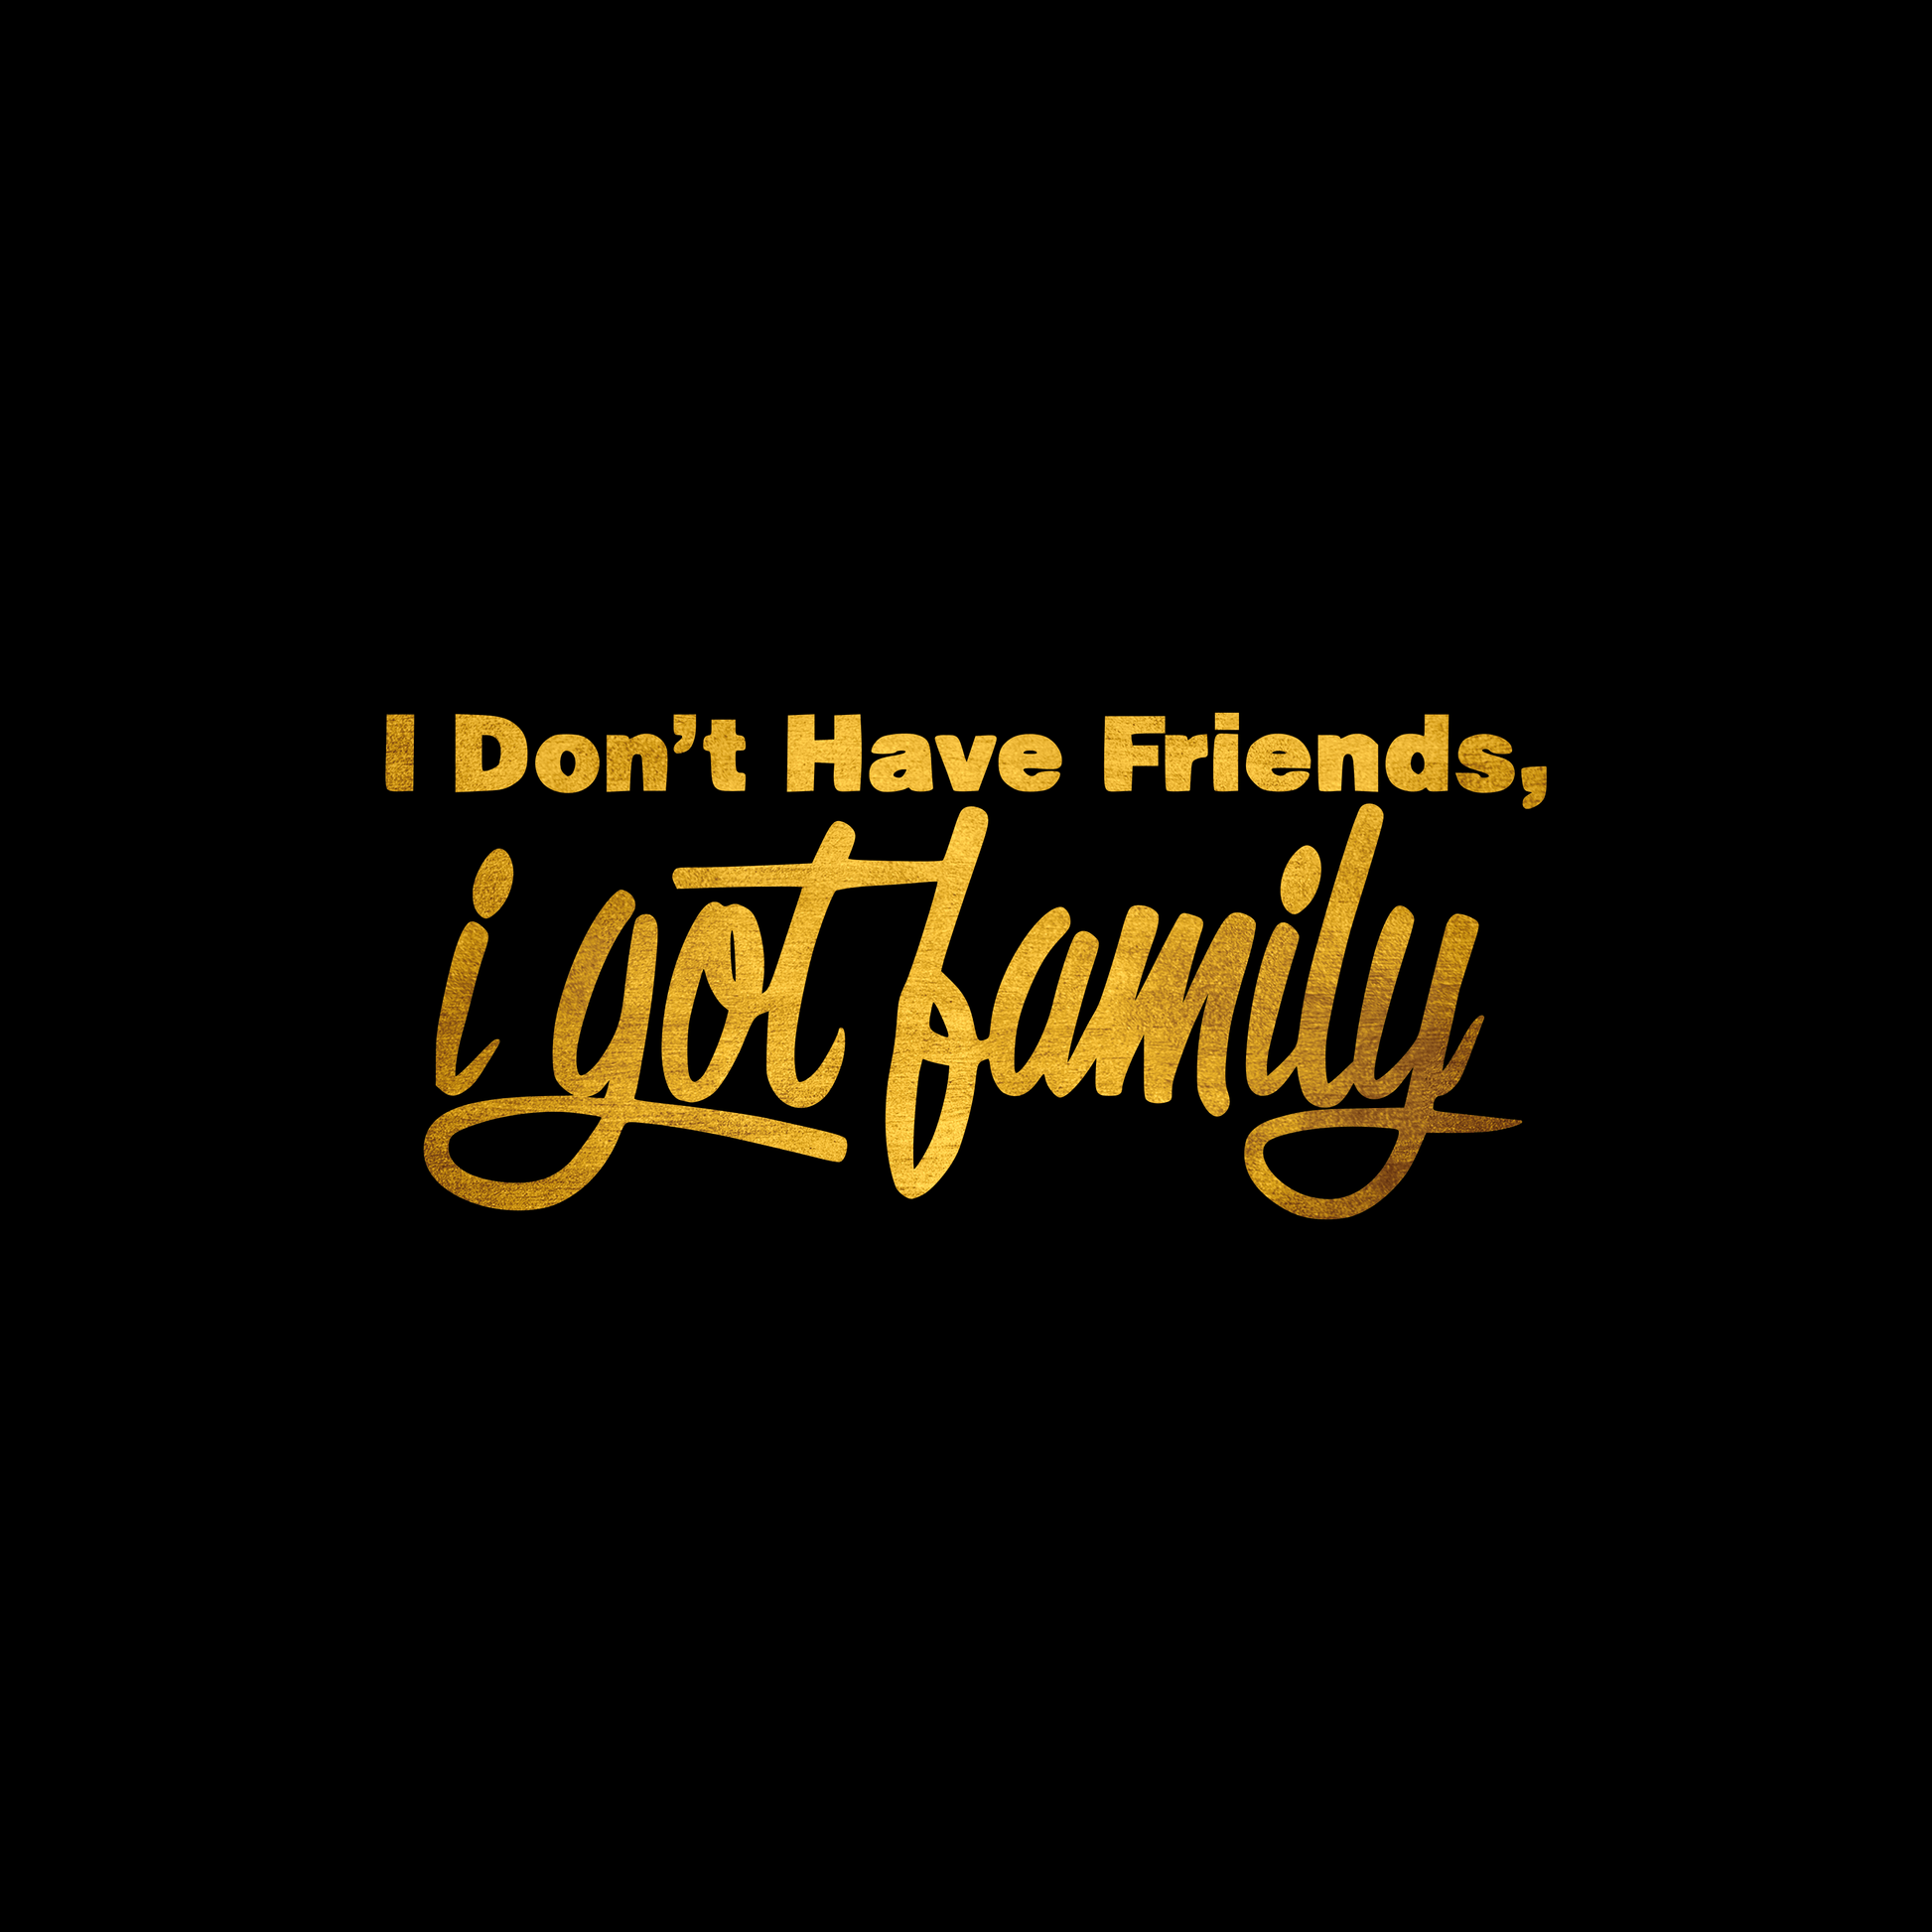 I don’t have friends, I got family sticker decal